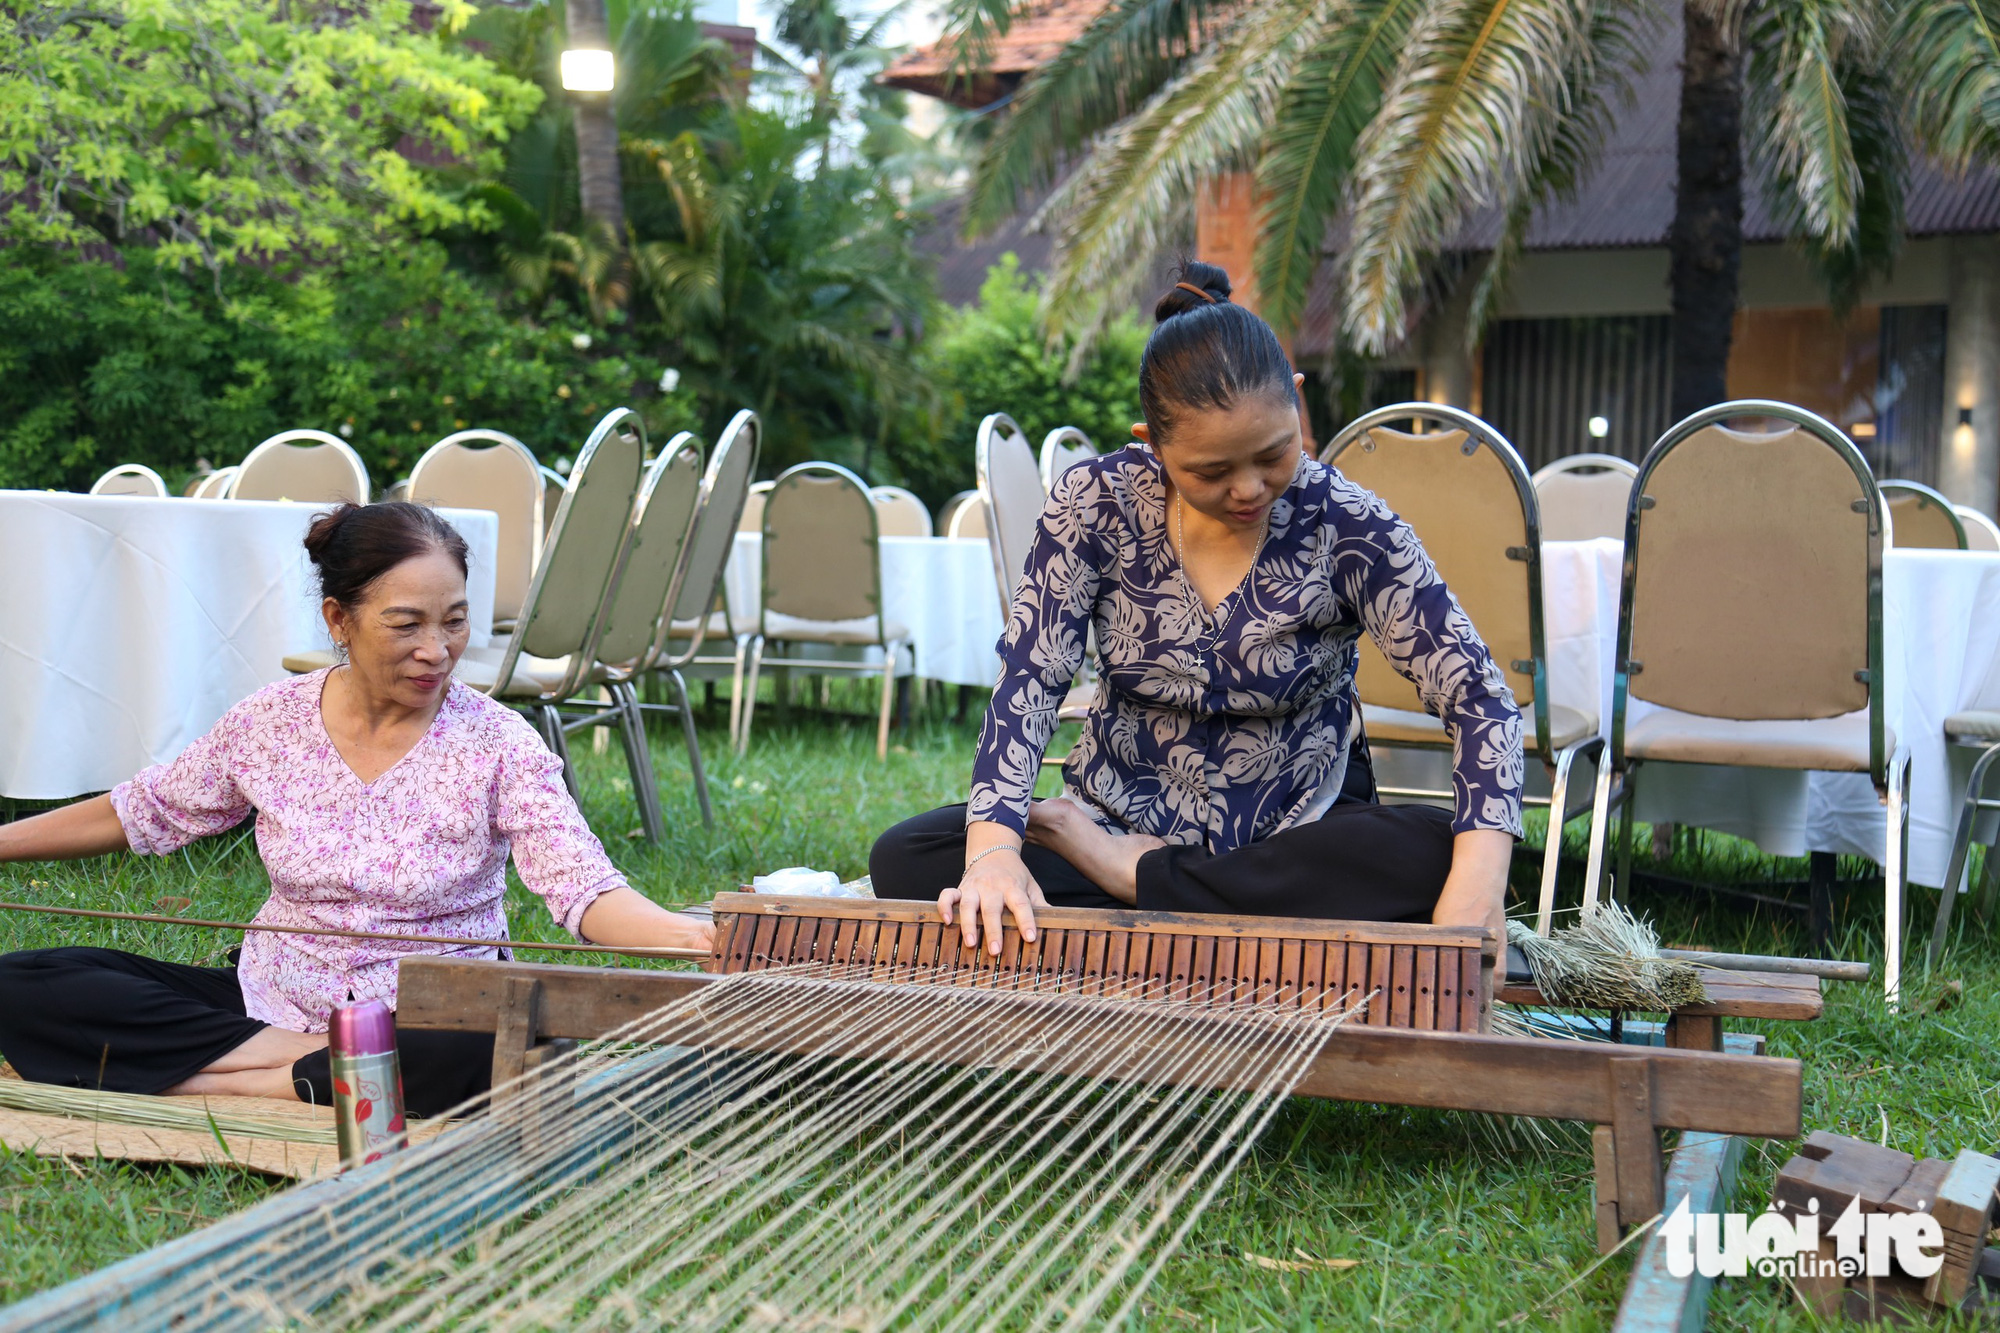 Women weave mats to showcase traditional handicrafts at the opening of the Saigontourist Group Food and Culture Festival 2023 at Van Thanh Tourist Site in Binh Thanh District, Ho Chi Minh City on April 20, 2023. Photo: Phuong Quyen / Tuoi Tre